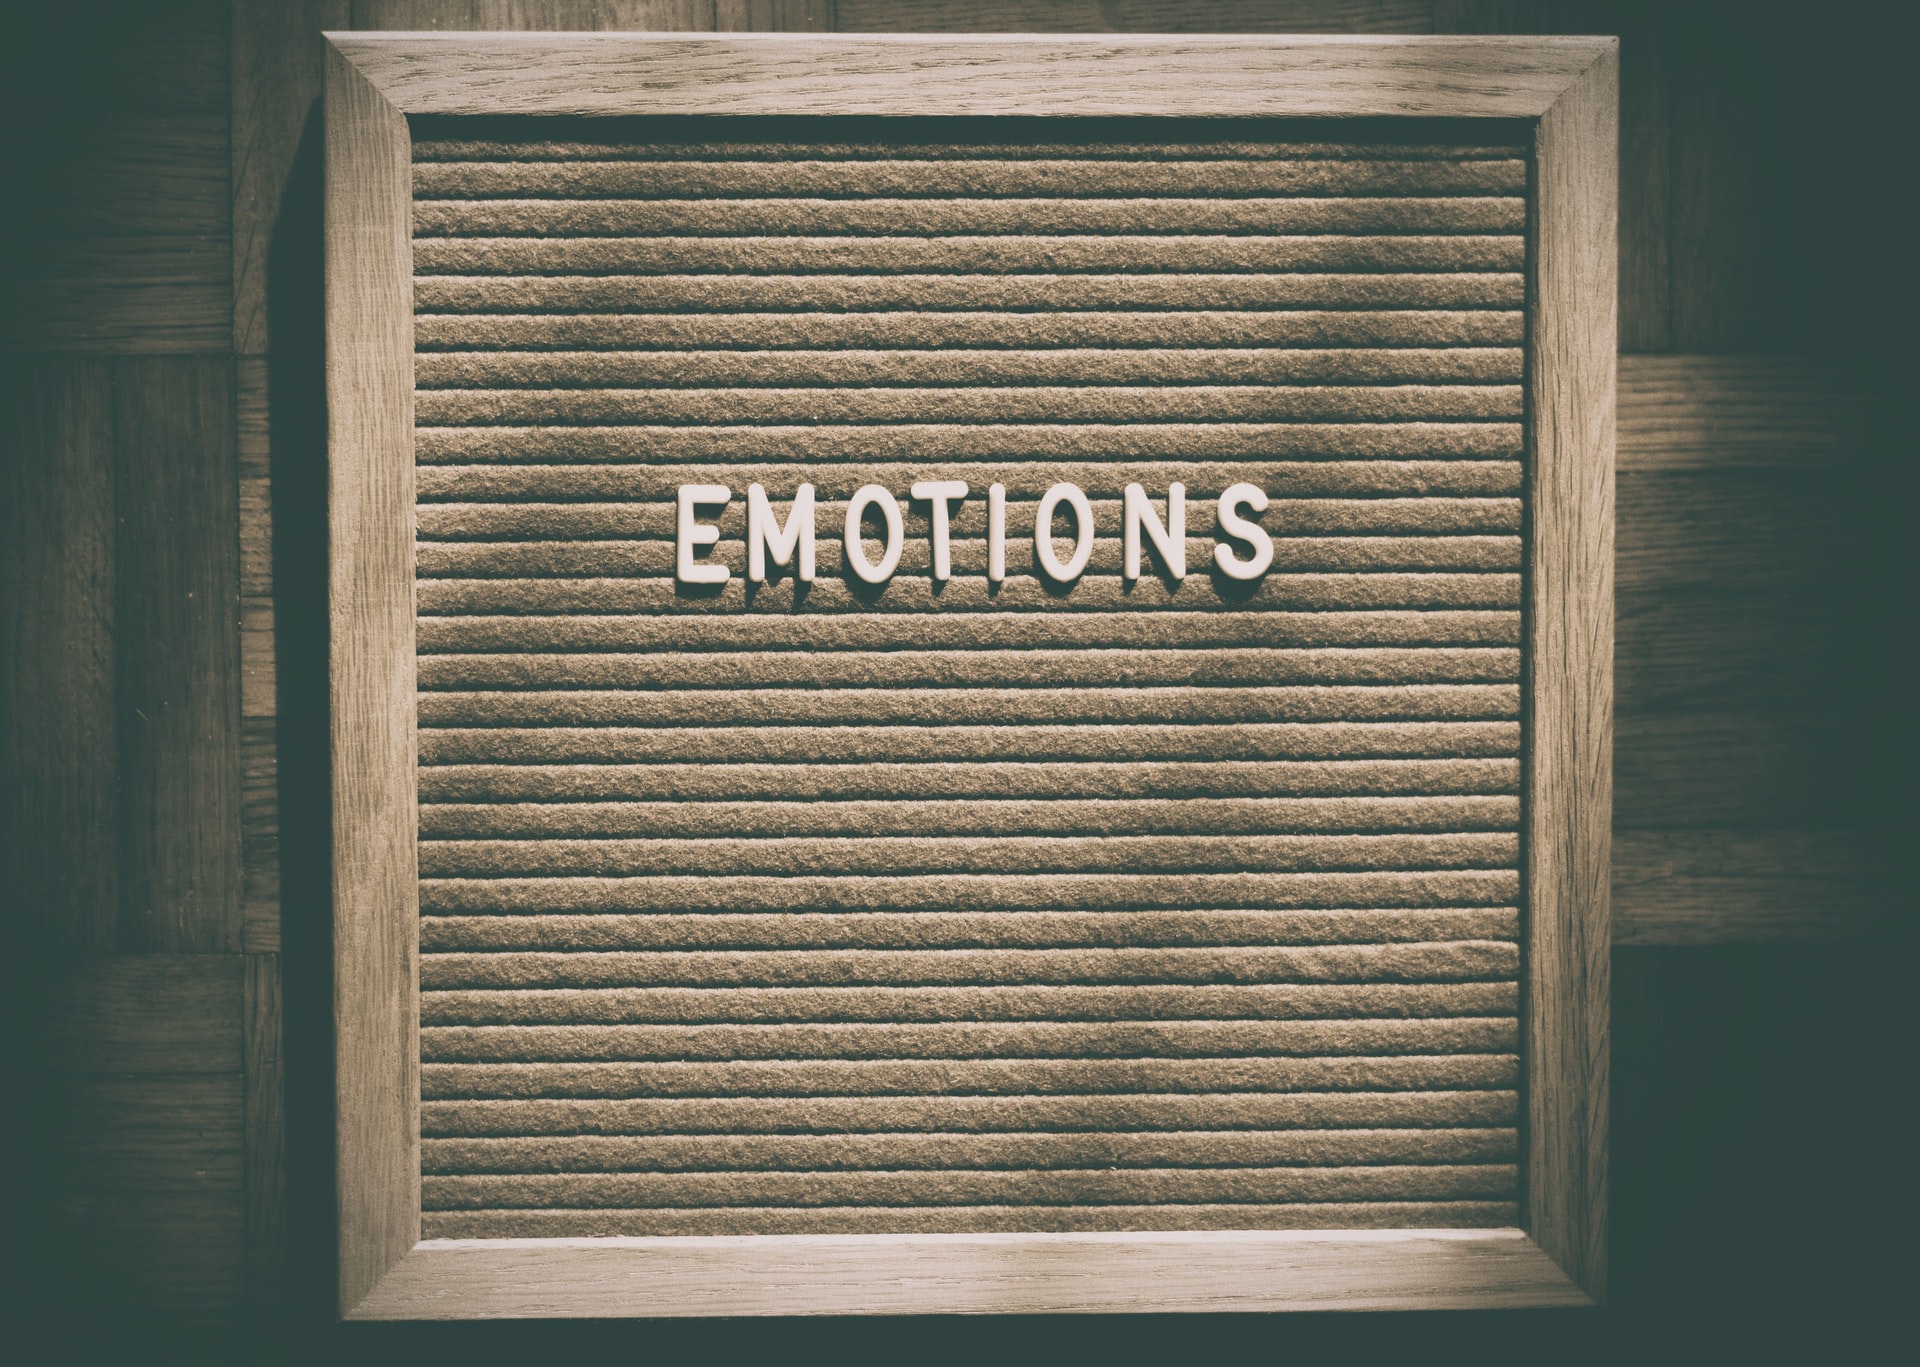 The word "emotions" written in white on a wooden platform